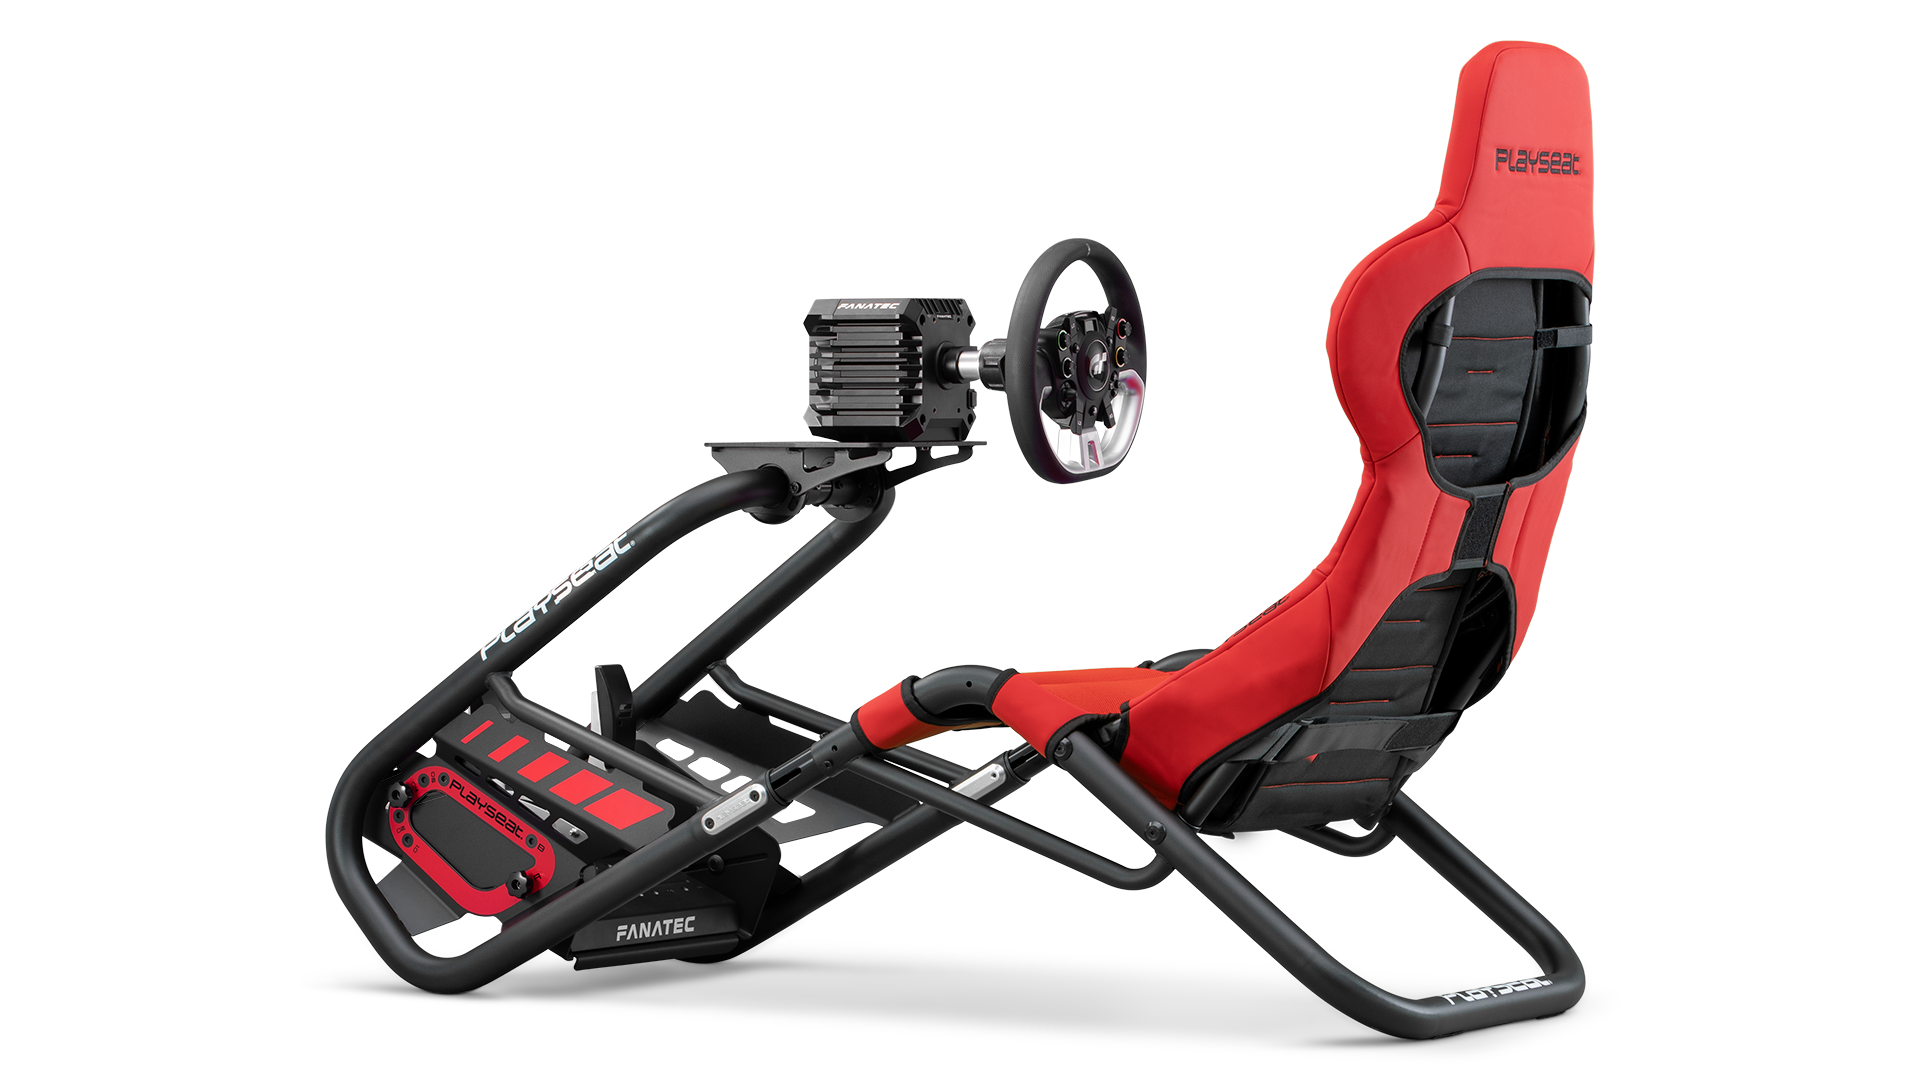 playseat-trophy-red-direct-drive-simulator-back-angle-view-fanatec-1920x1080-3.png